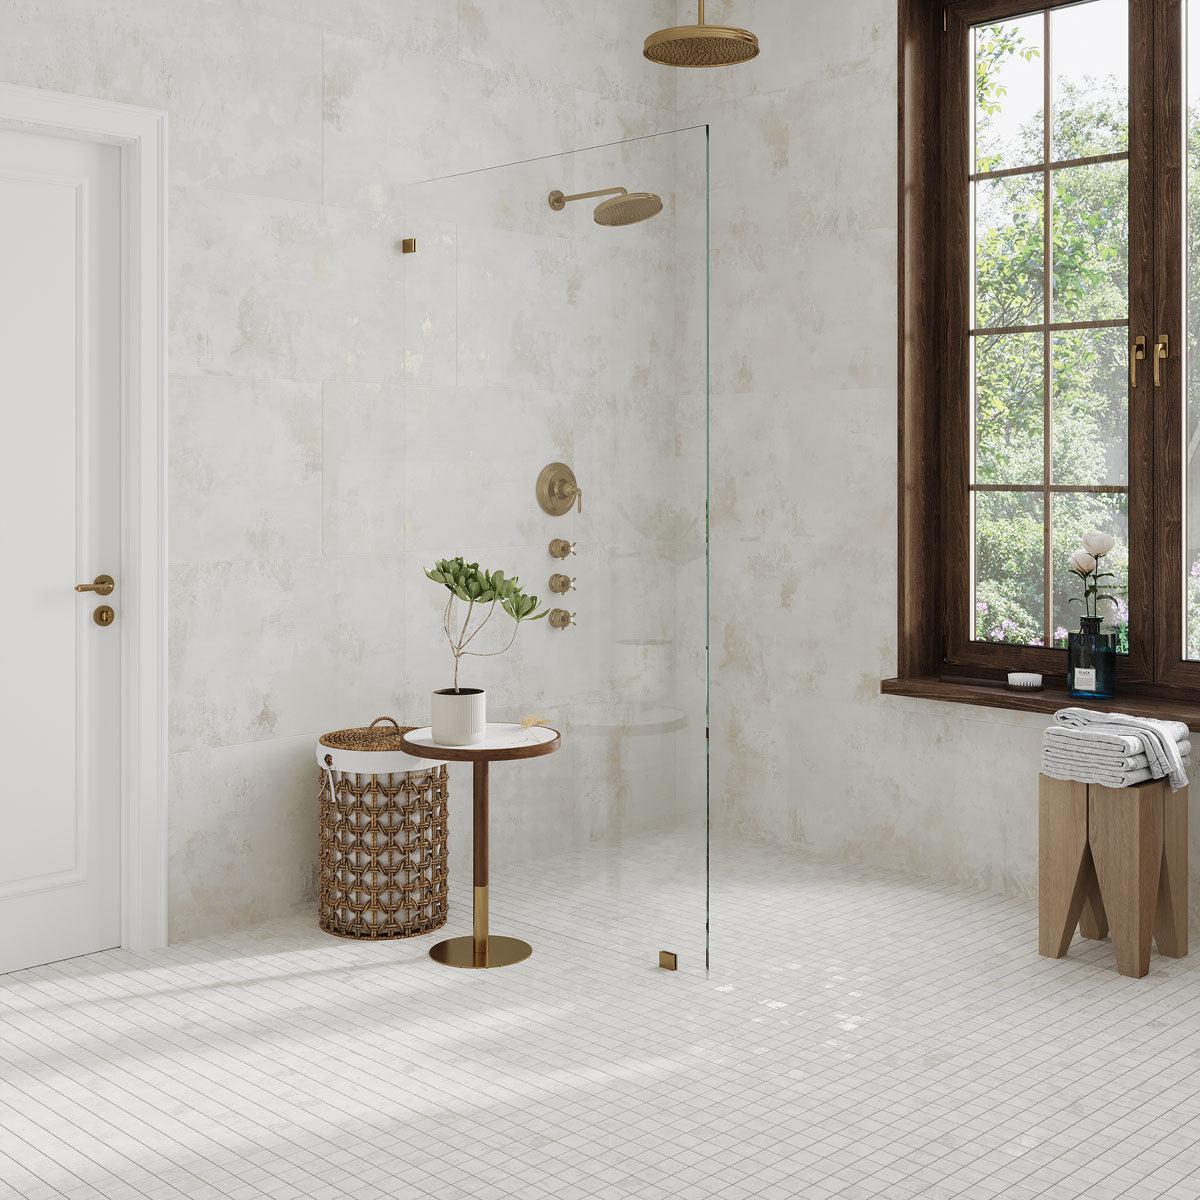 Elegant White Curbless Shower with Gilded Age White Porcelain Tiles and Mosaic Shower Floor